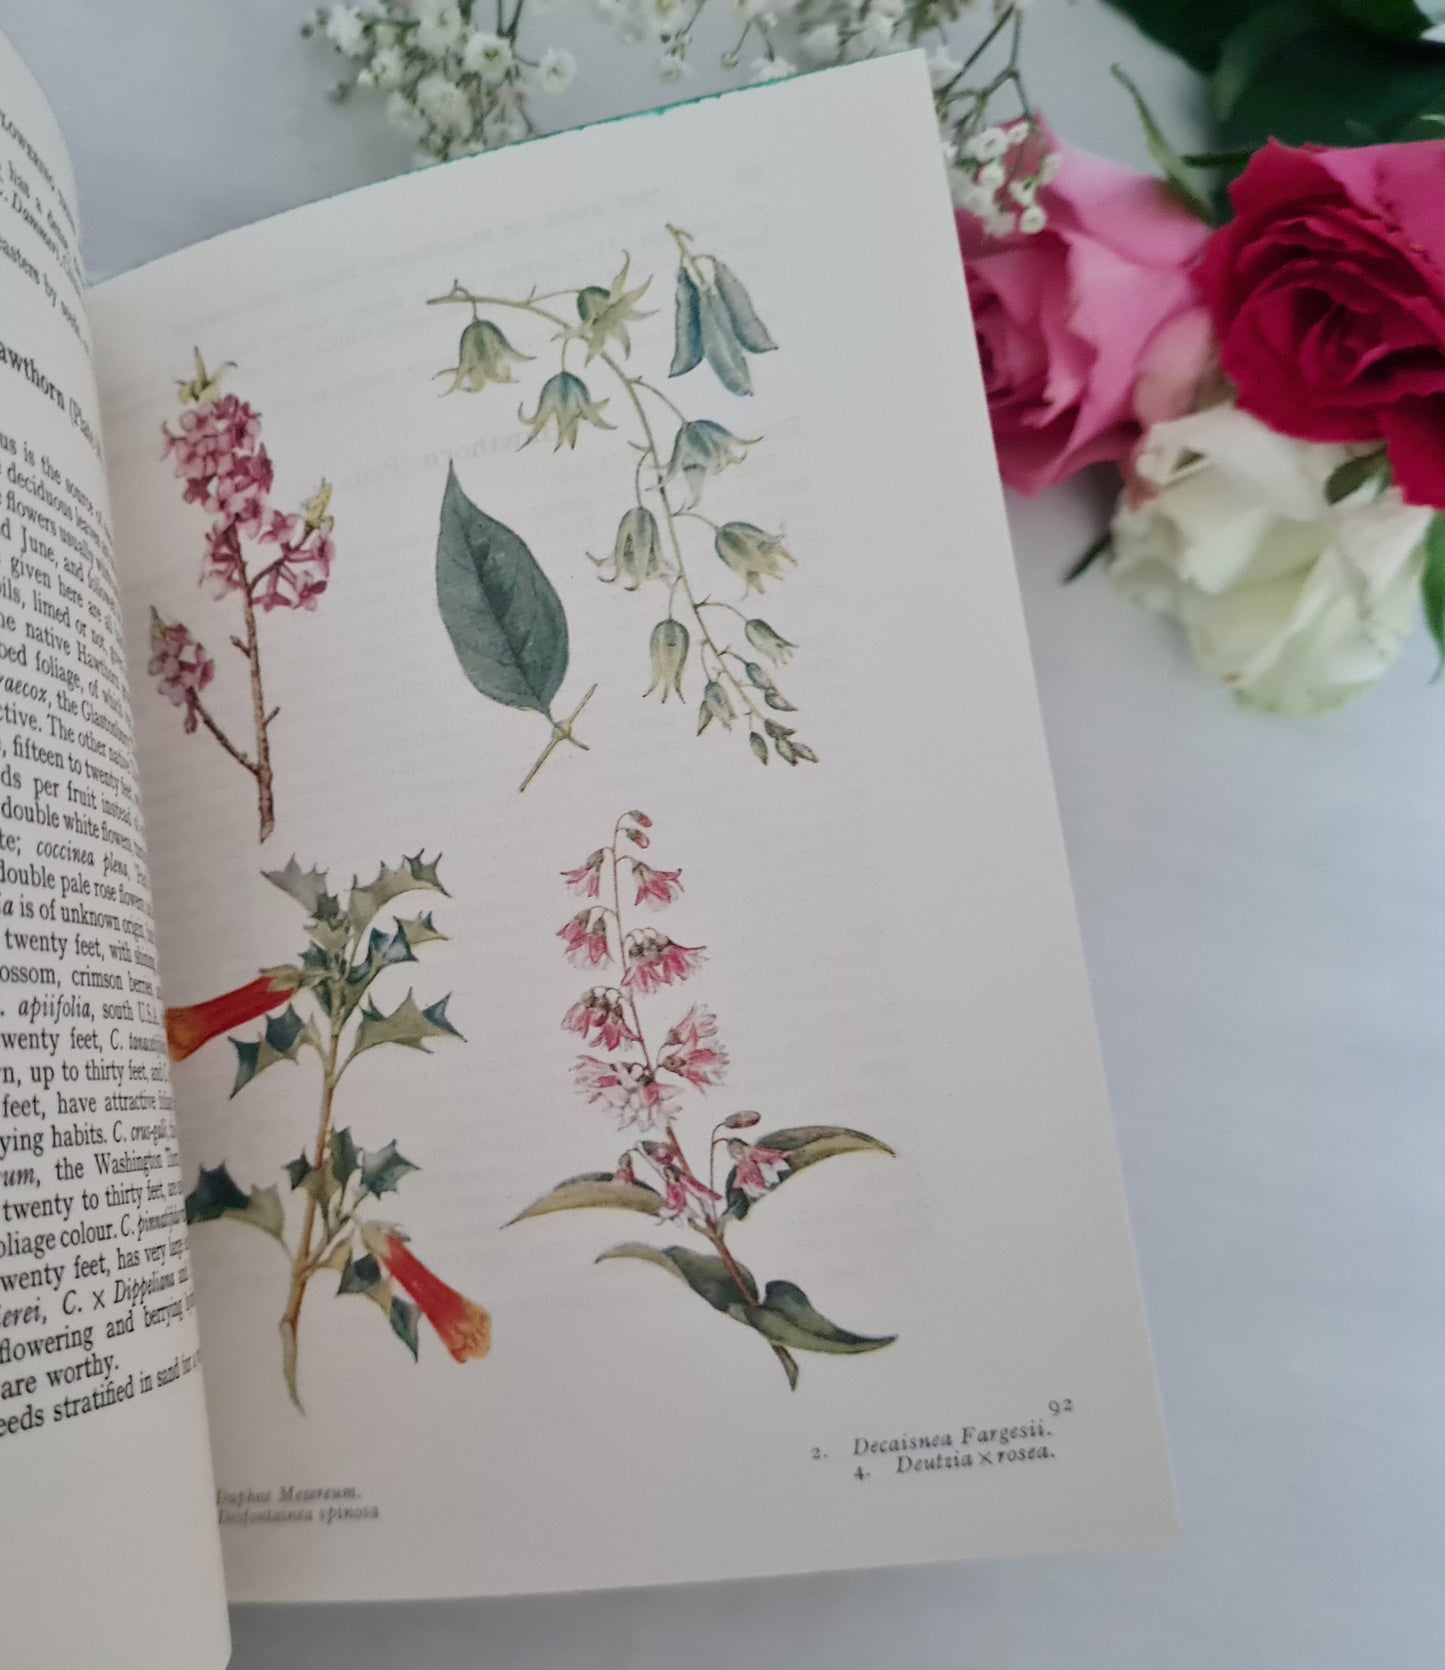 The Book of Flowering Trees and Shrubs / 1956 Warne & Co. Ltd, London / 63 Colour Plates Illustrating Over 250 Species / With Dust Jacket